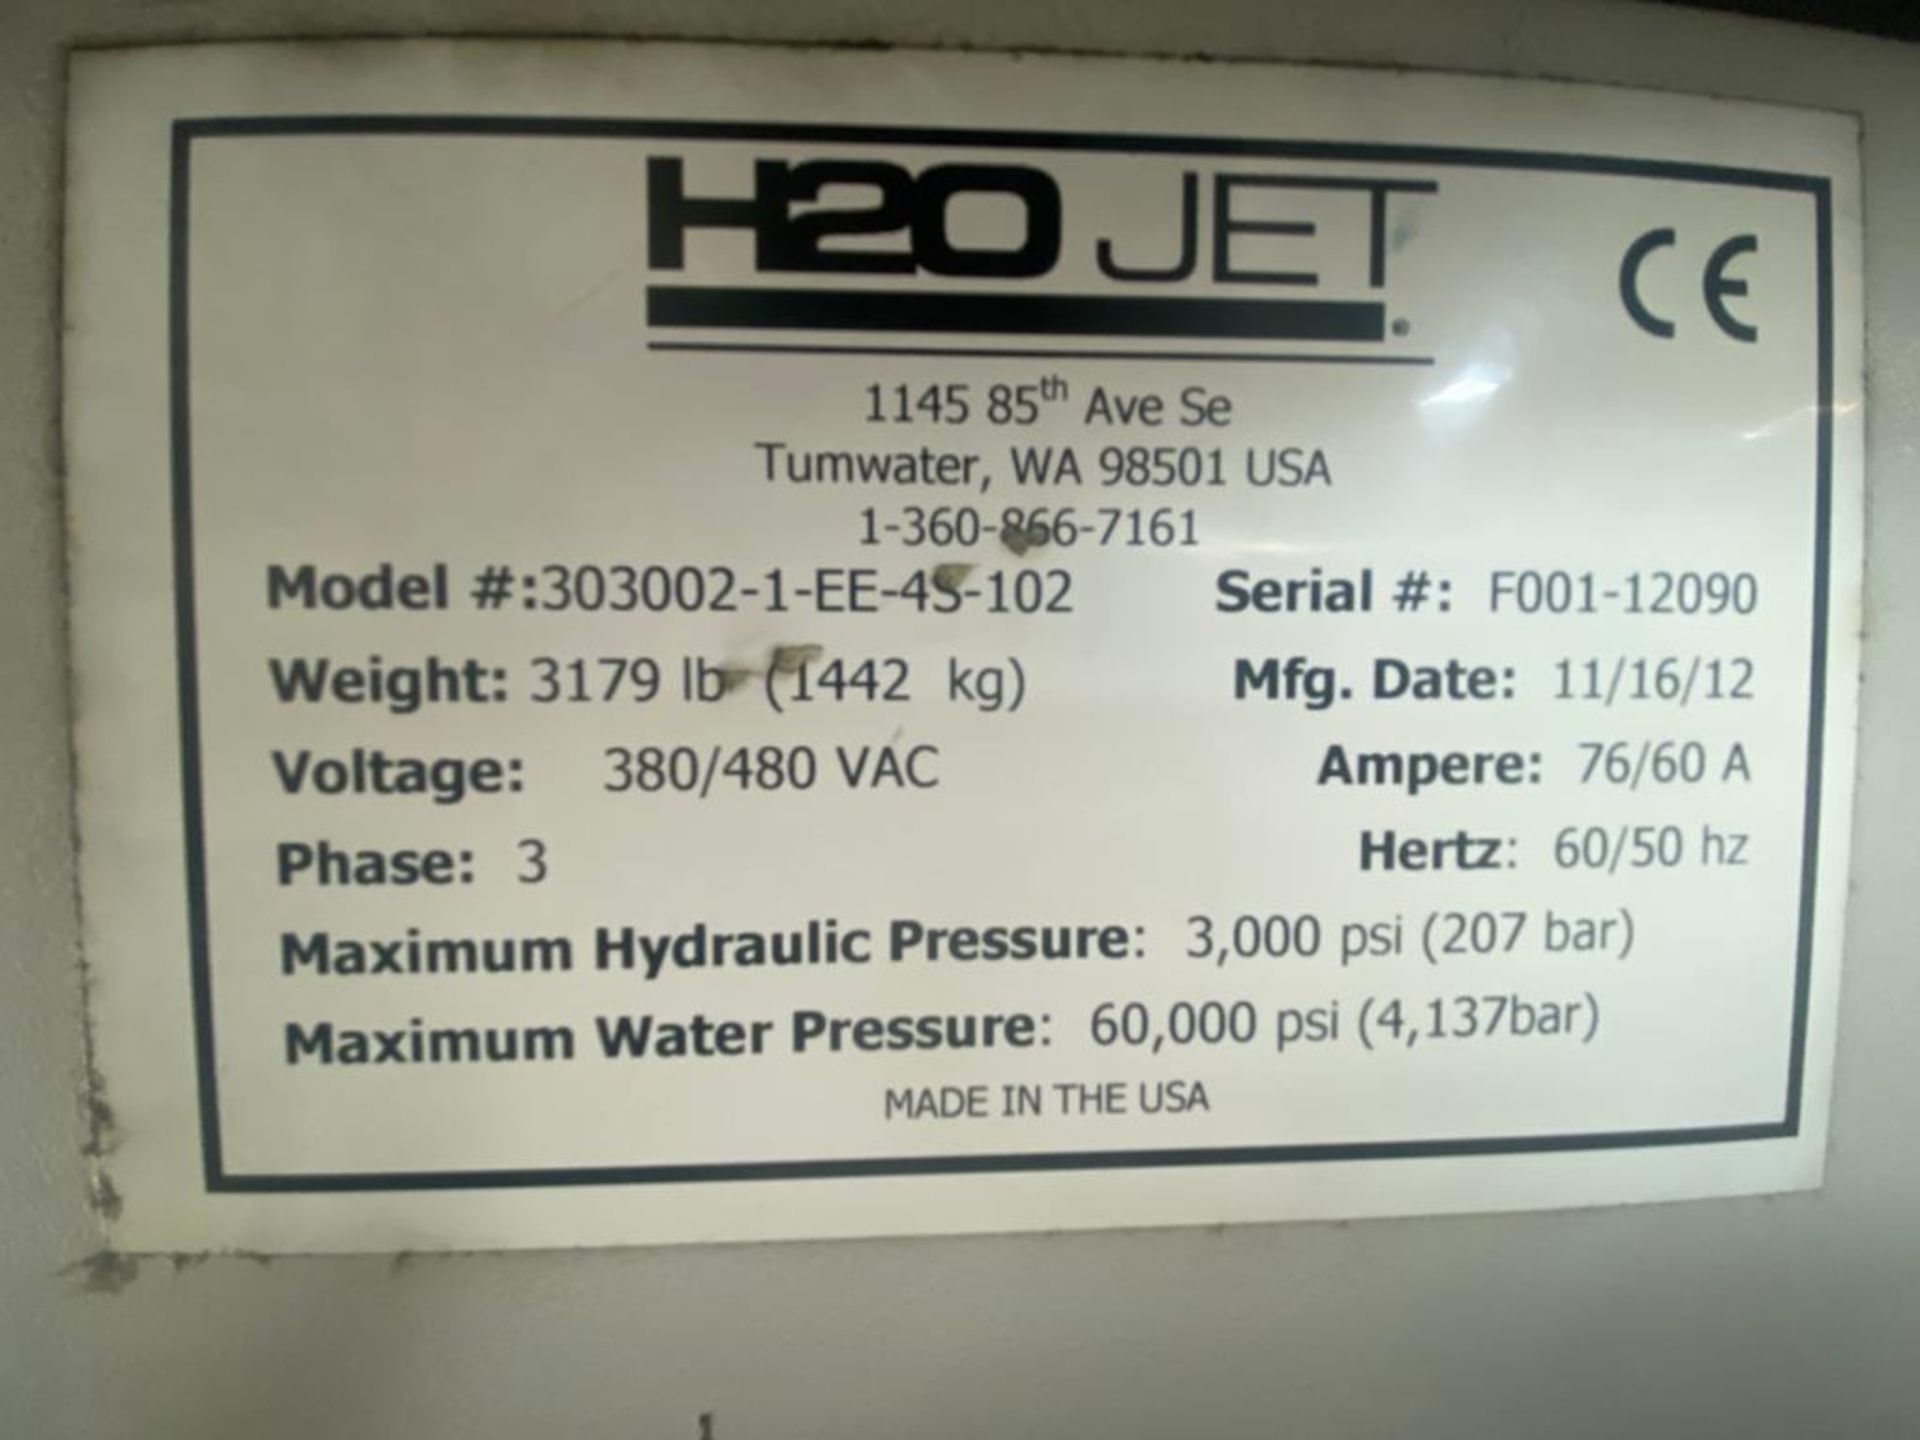 Waterjet cutting system type H2O JET, model 303002-1-EE-4S-102 - Image 47 of 48